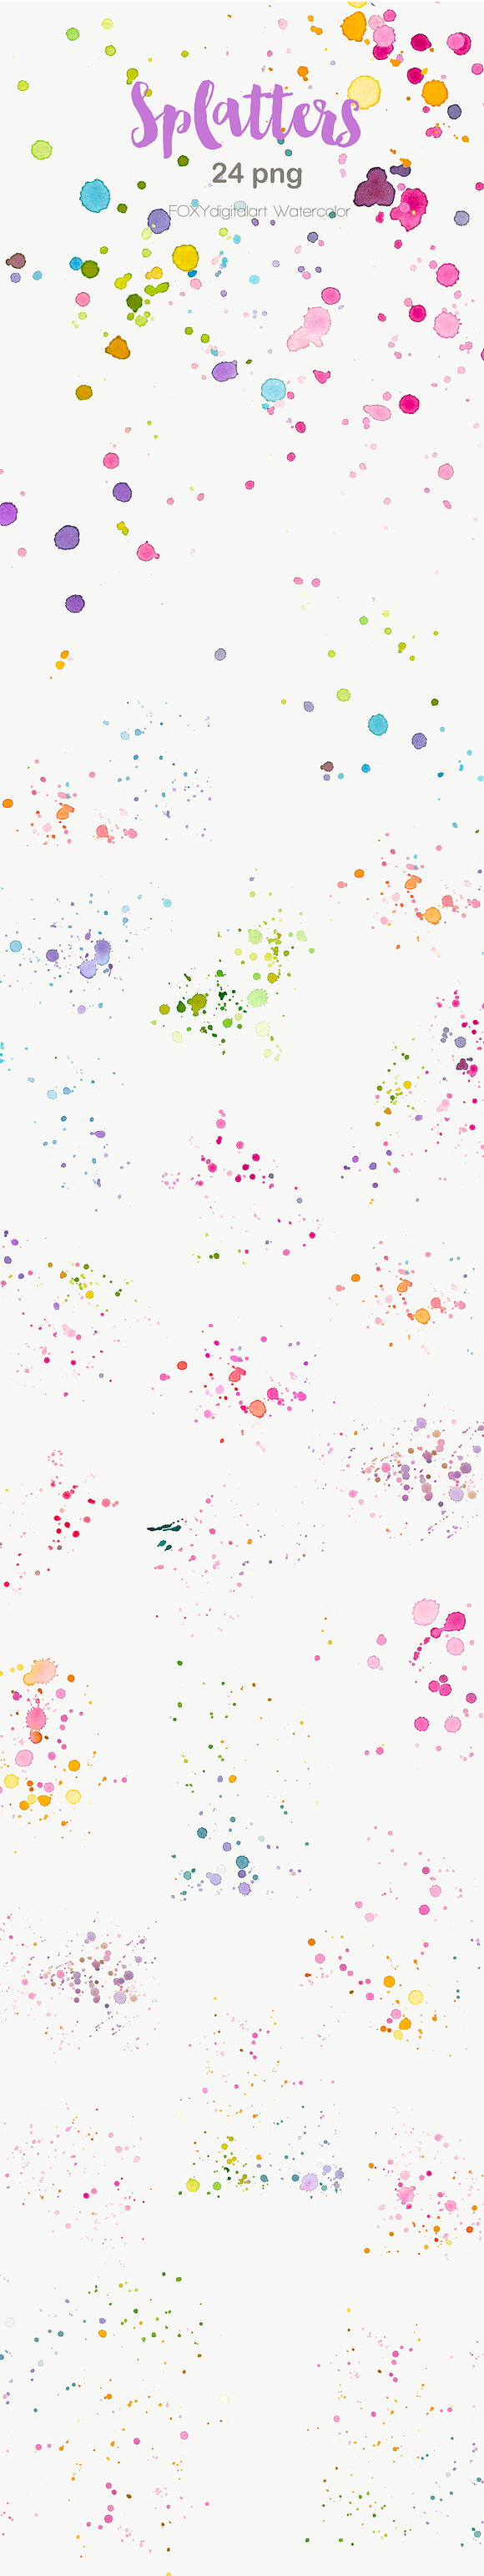 Watercolor splatters paint splashes in Illustrations - product preview 2